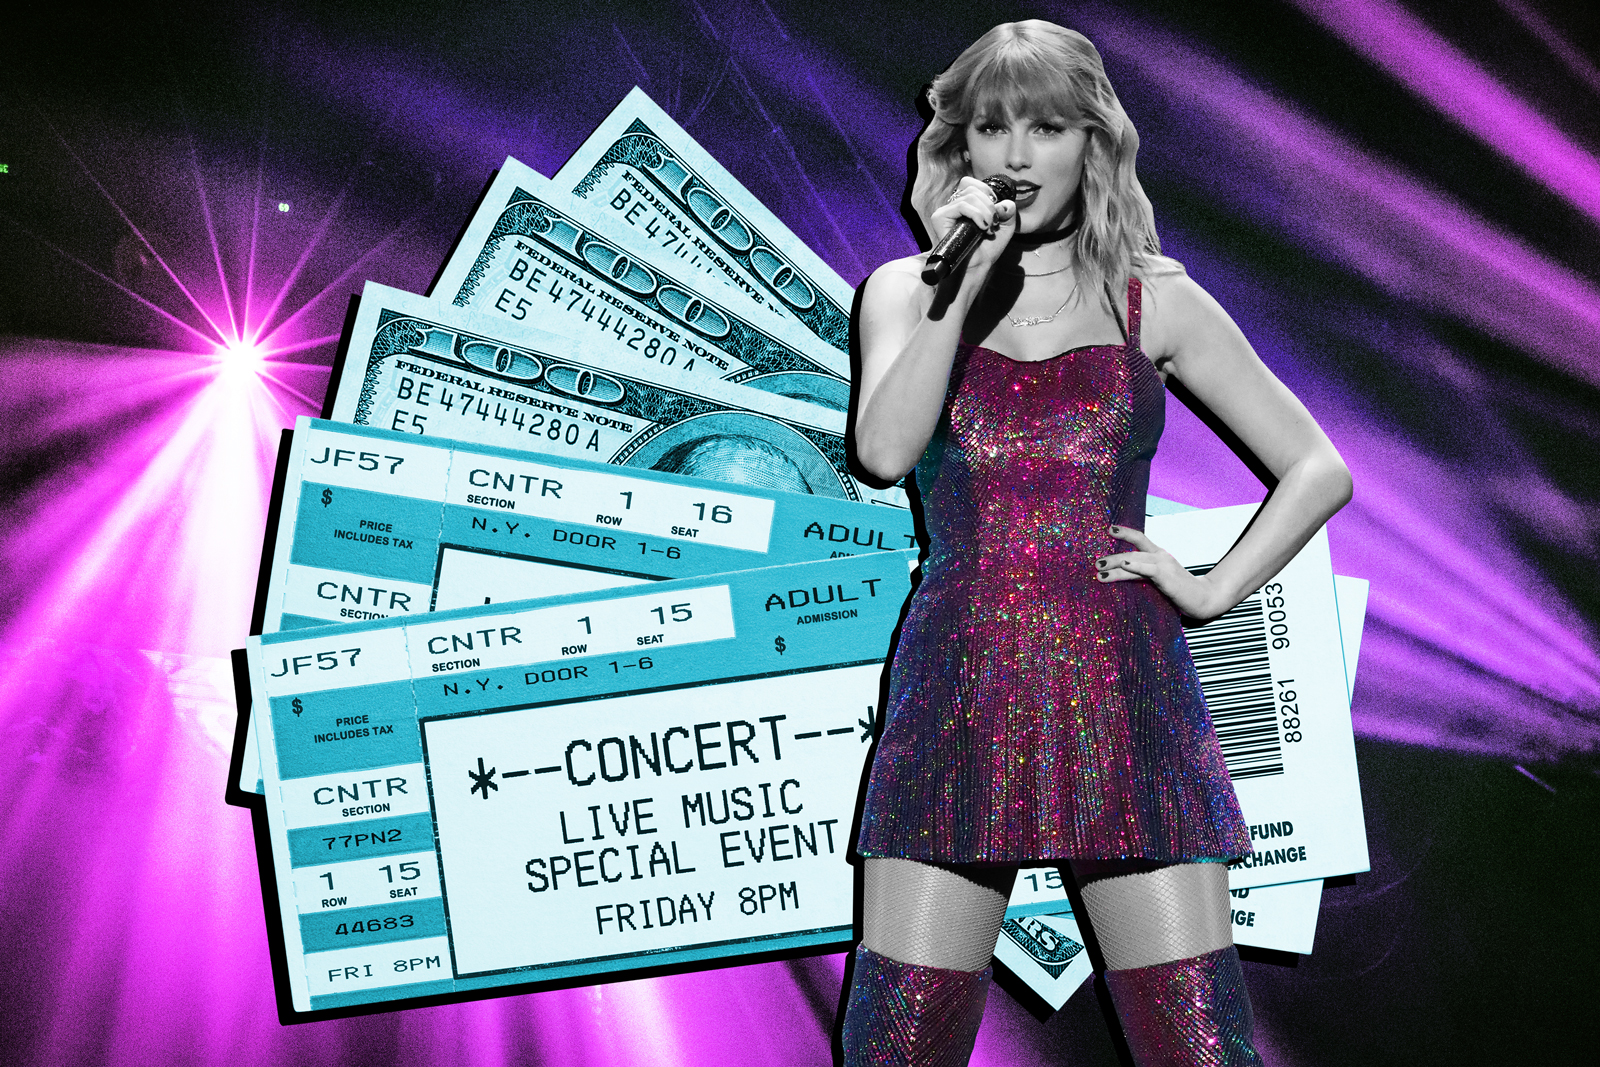 How to Avoid Getting Ripped Off While Trying to Buy Taylor Swift Tickets